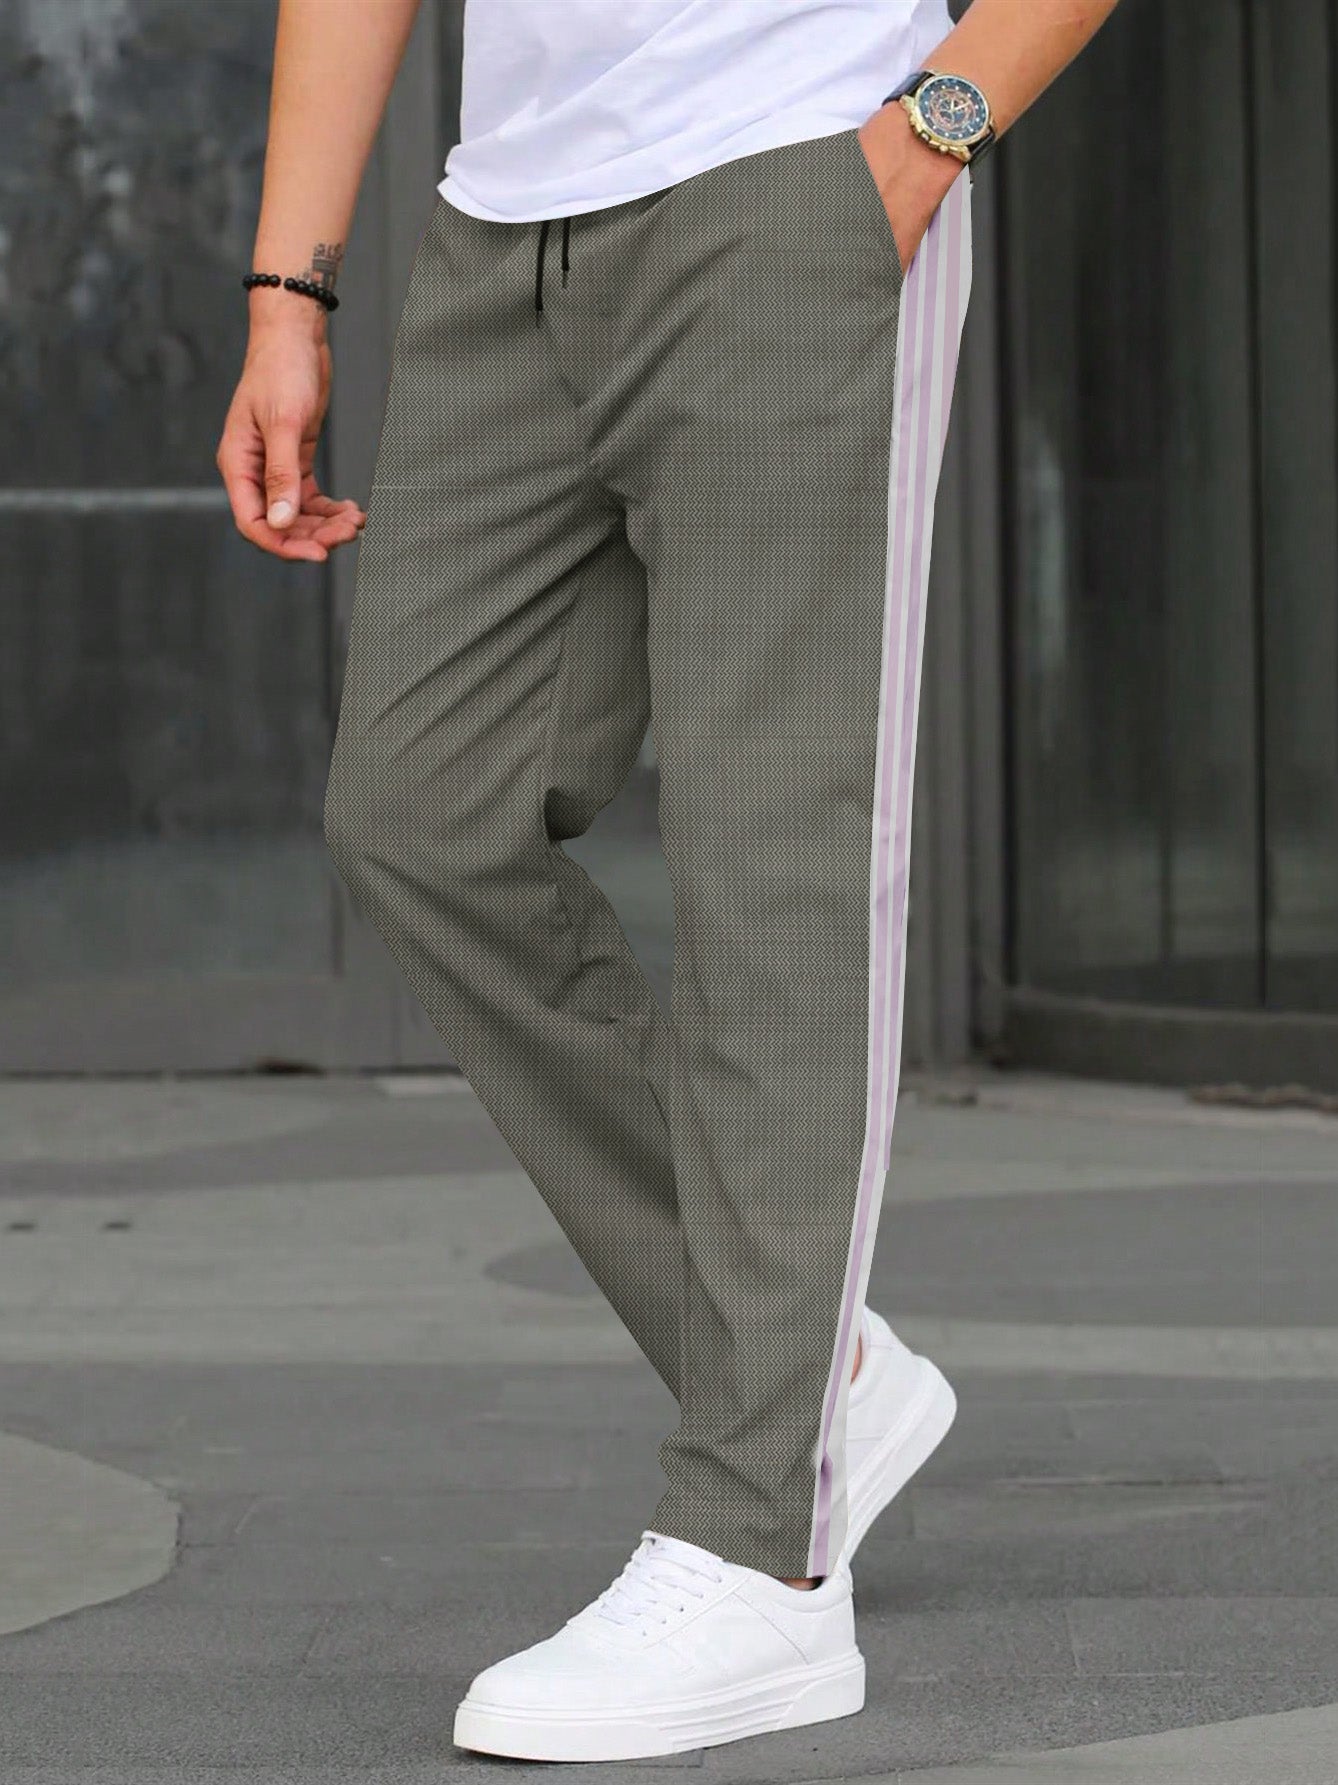 Louis Vicaci Slim Fit Summer Active Wear Trouser For Men-Grey with Allover Texture & Stripe-SP1726